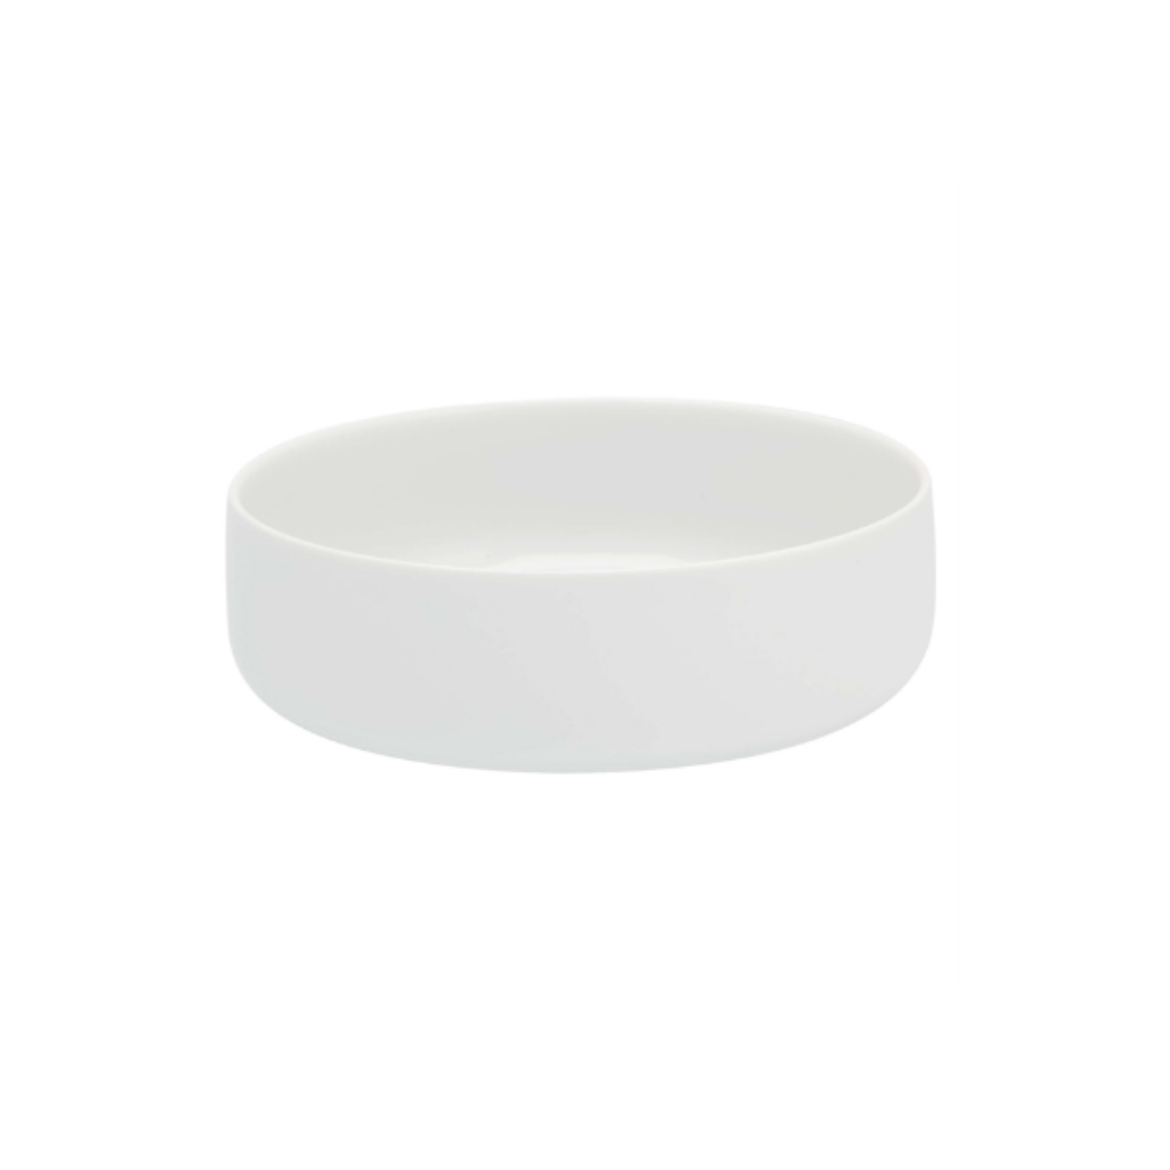 Picture of Silkroad White Small Salad Bowl